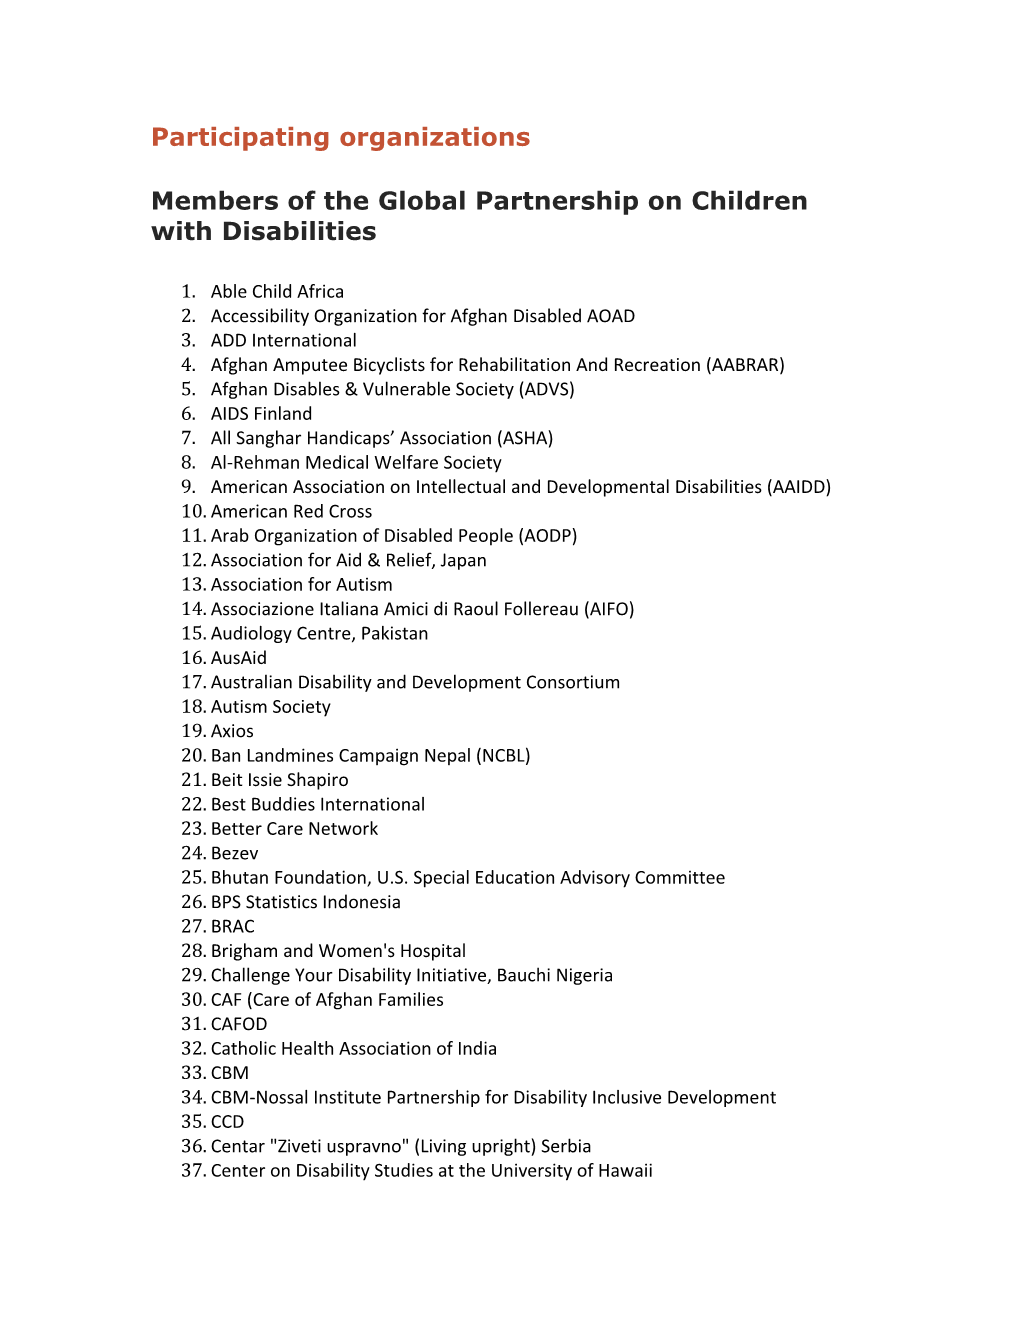 Members of the Global Partnership on Children with Disabilities